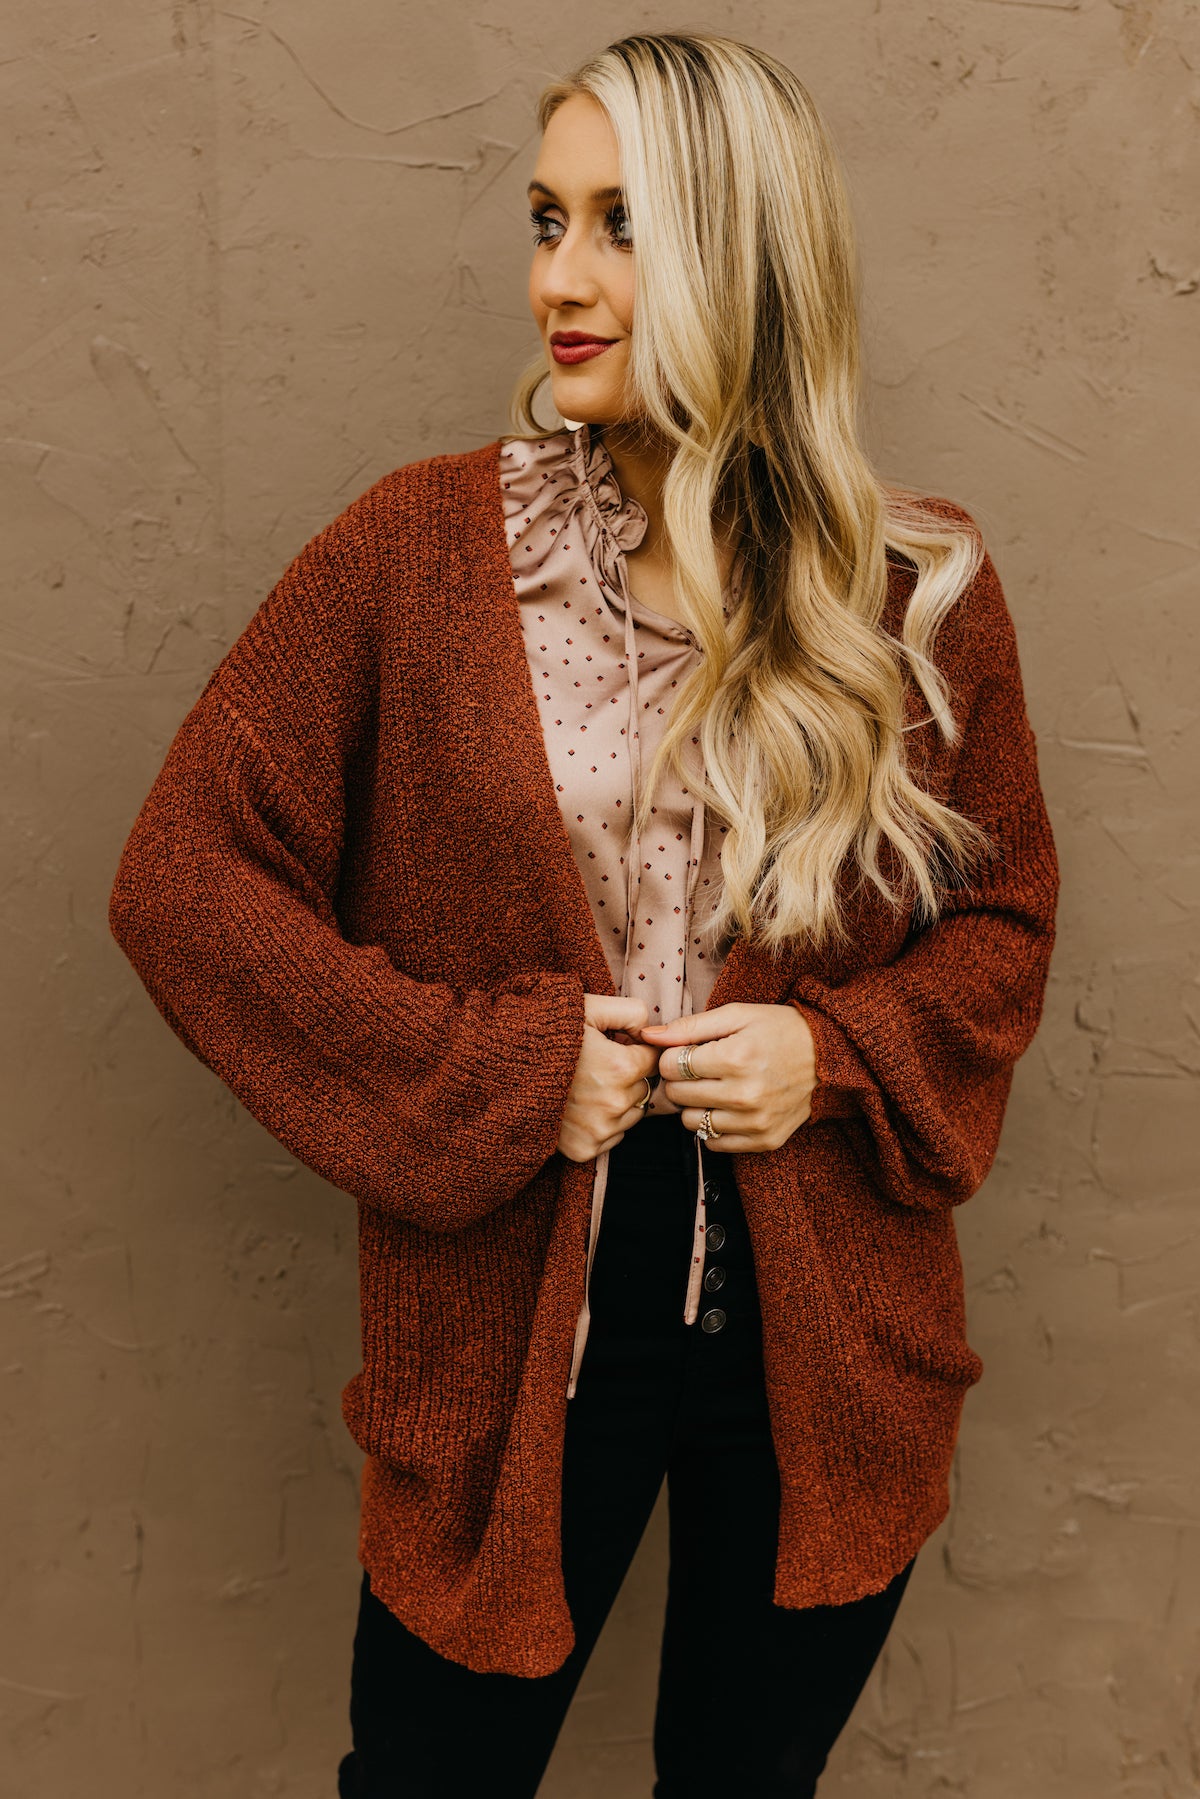 The Bodie Peppered Braid Back Cardigan